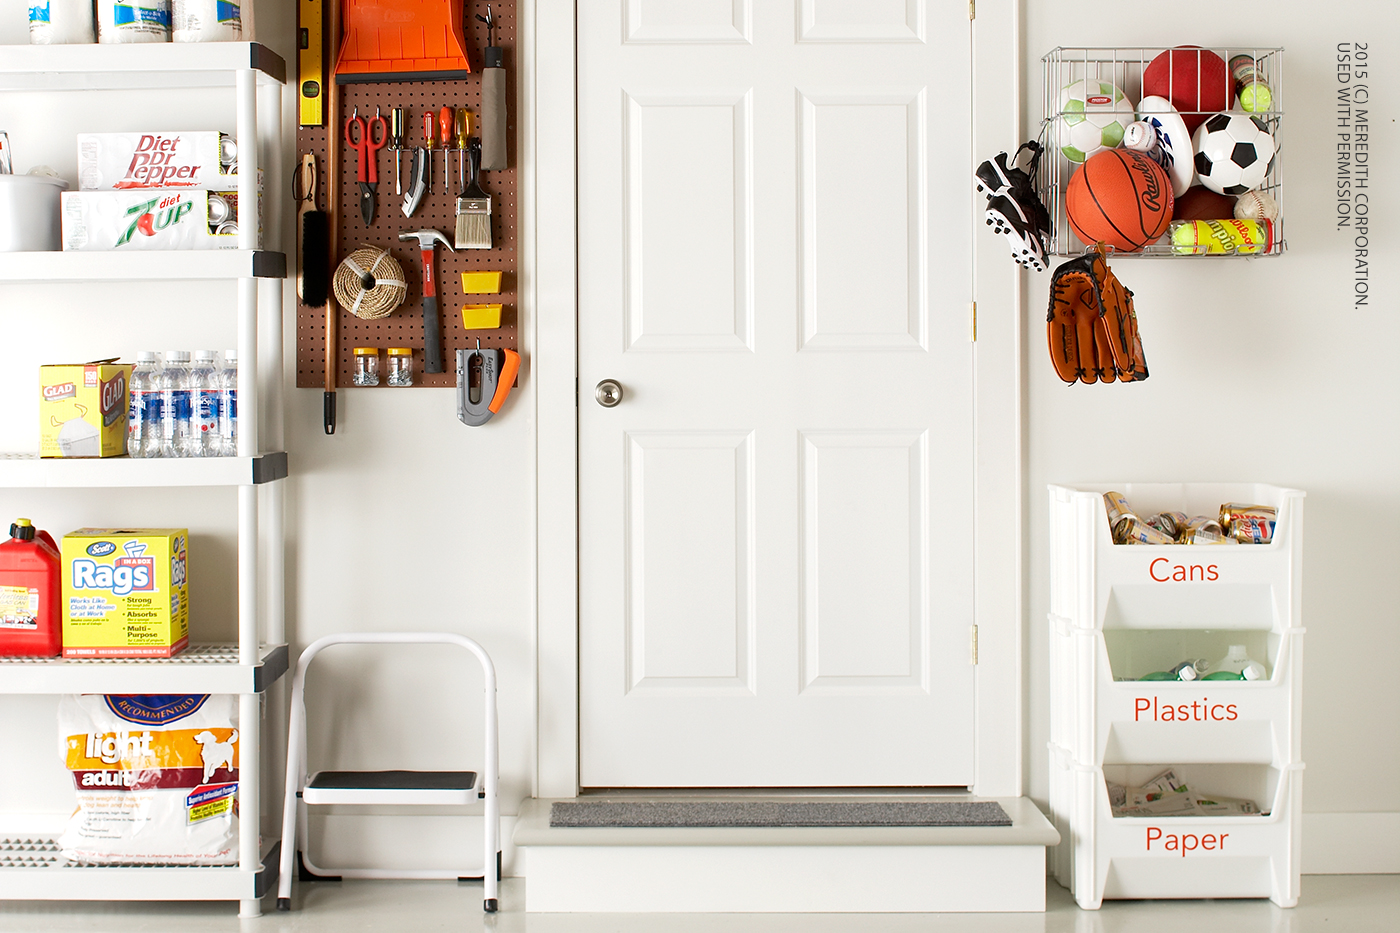 Top Storage Tips for Organizing Your Garage - bhgrelife.com